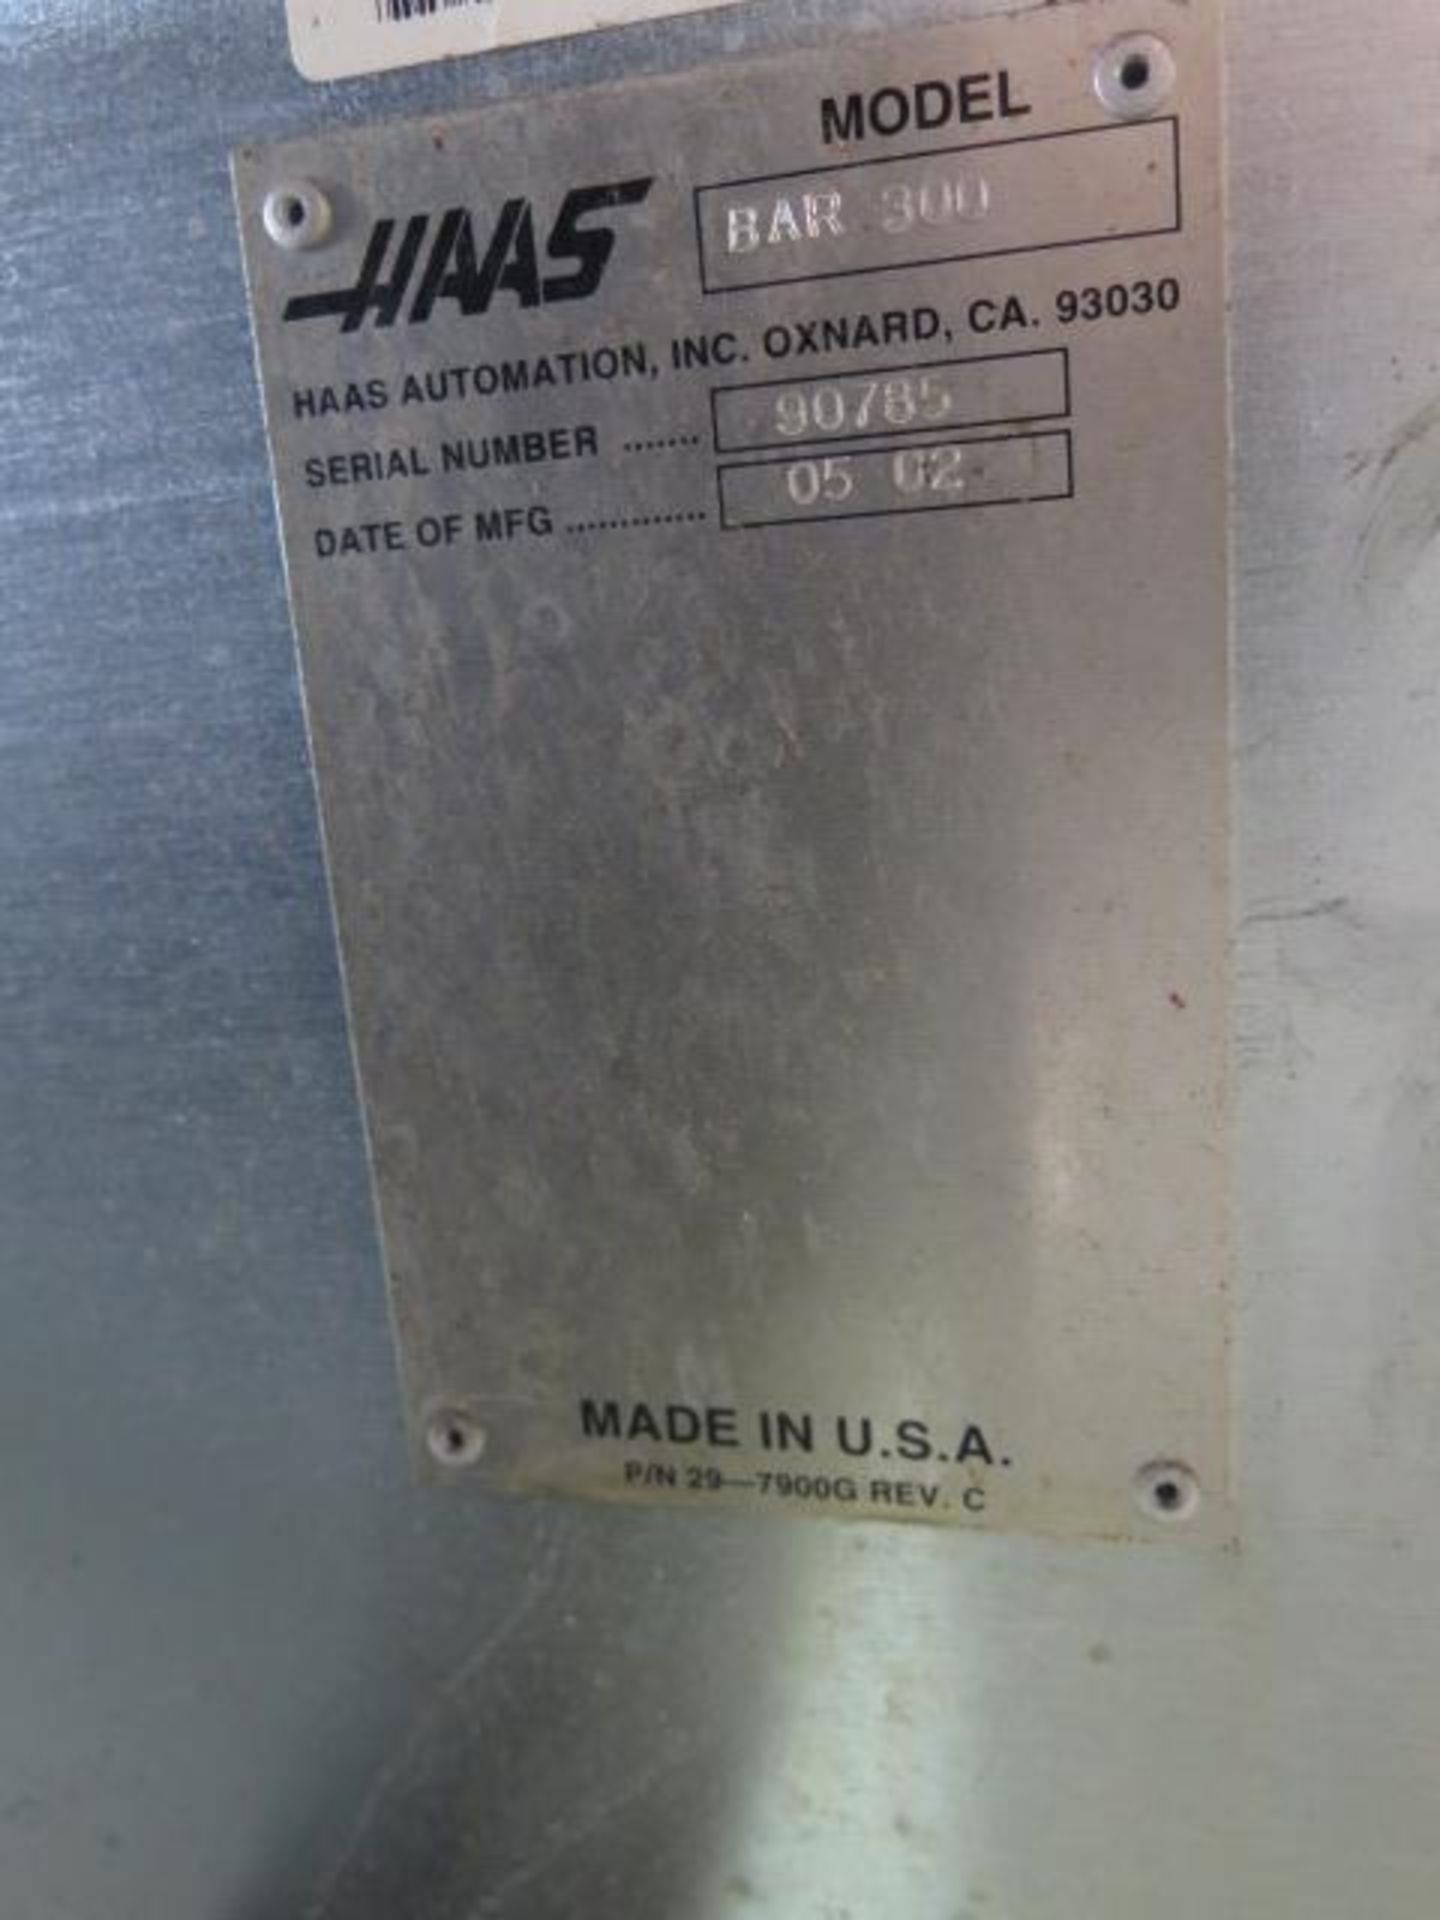 Haas ServoBar 300 Automatic Bar Loader / Feeder (SOLD AS-IS - NO WARRANTY) - Image 8 of 8